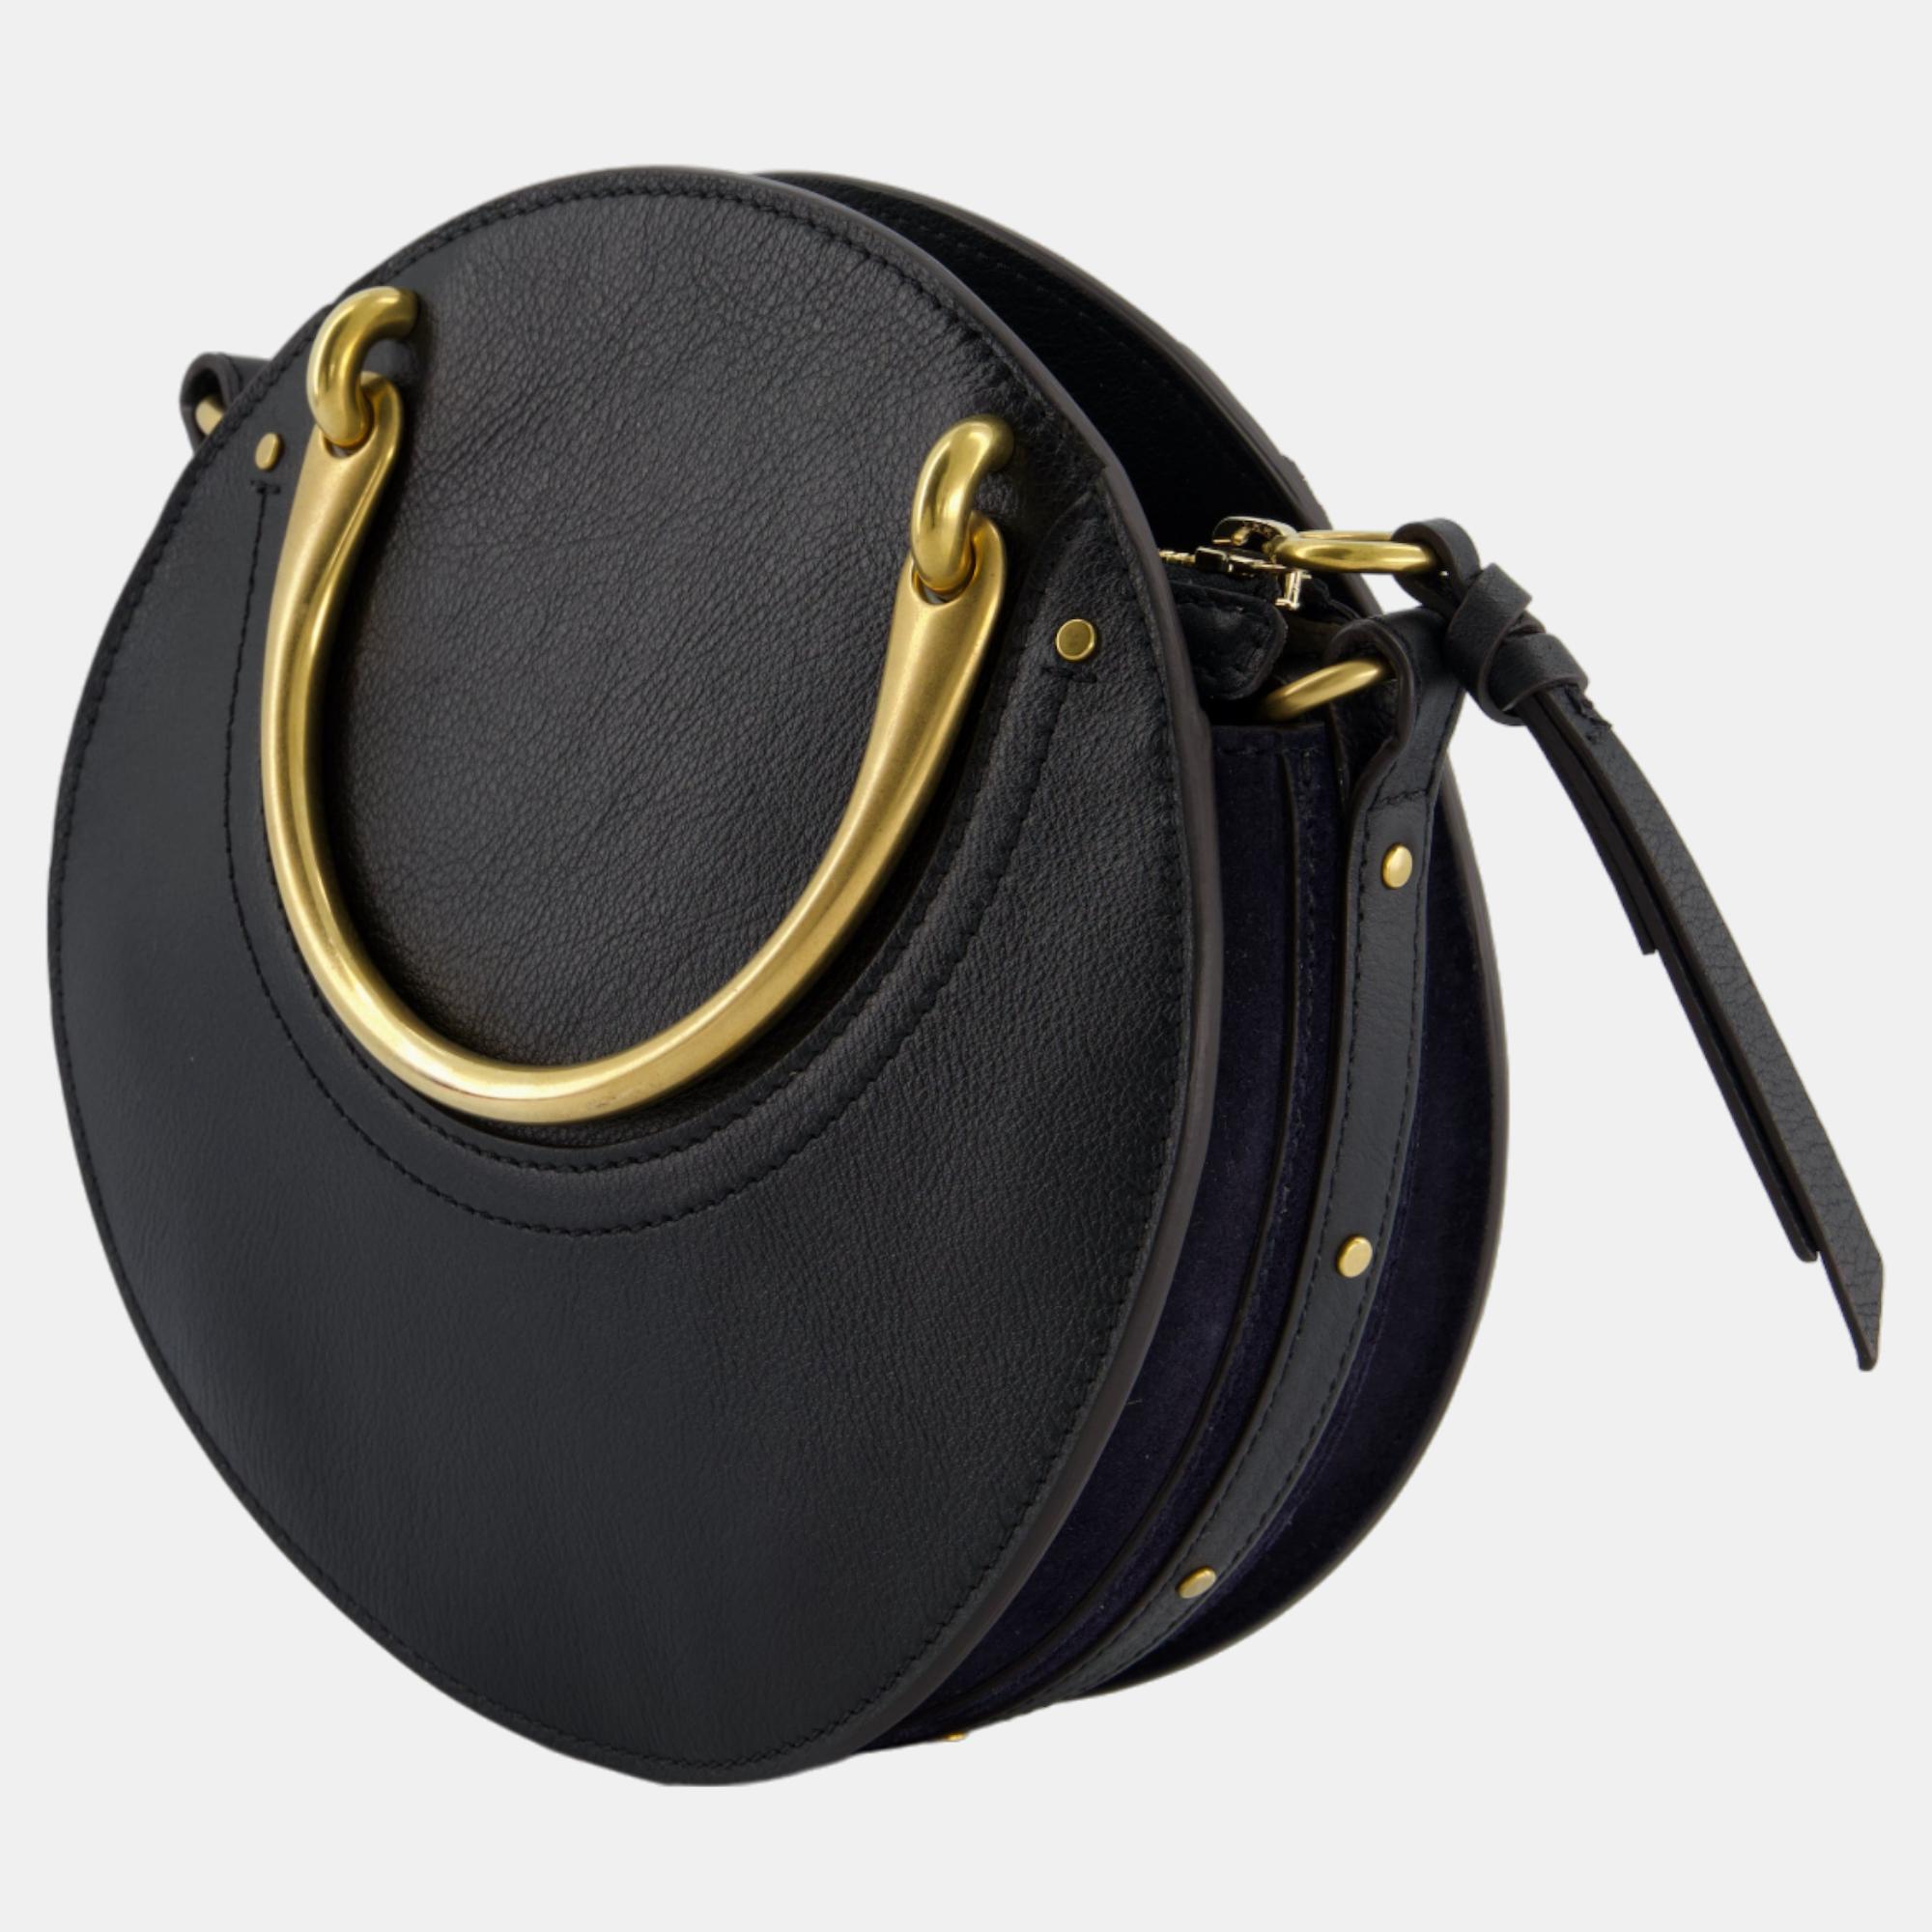 Chloe Navy Suede, Black Leather Round Pixie Cross-Body Bag With Gold Hardware